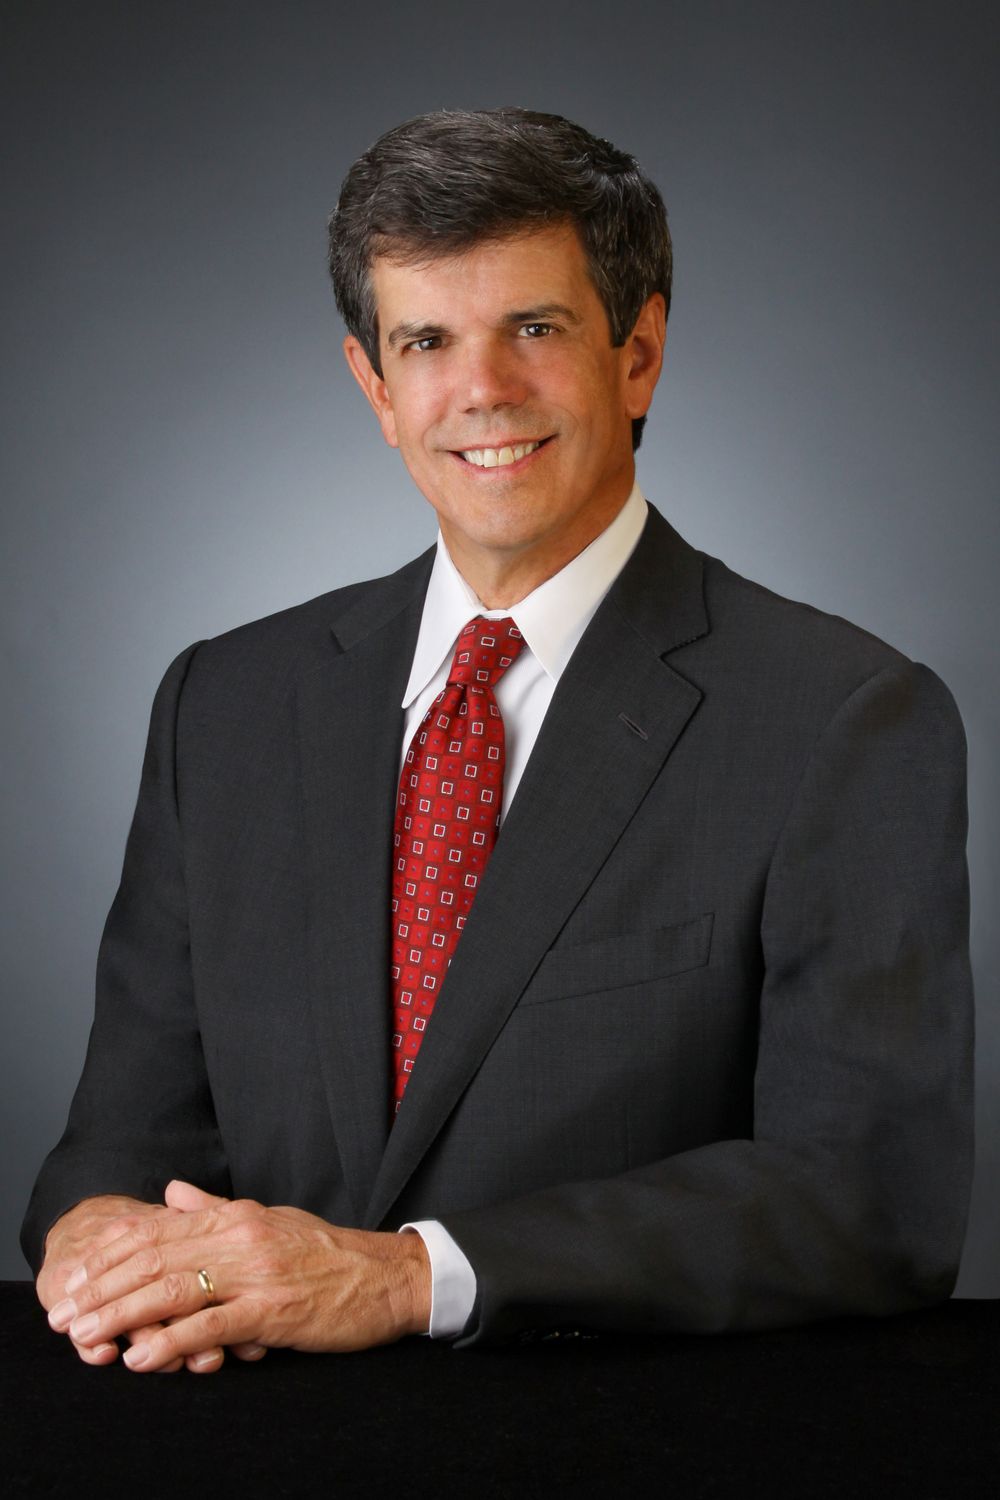 Fred Sasser, chairman and CEO